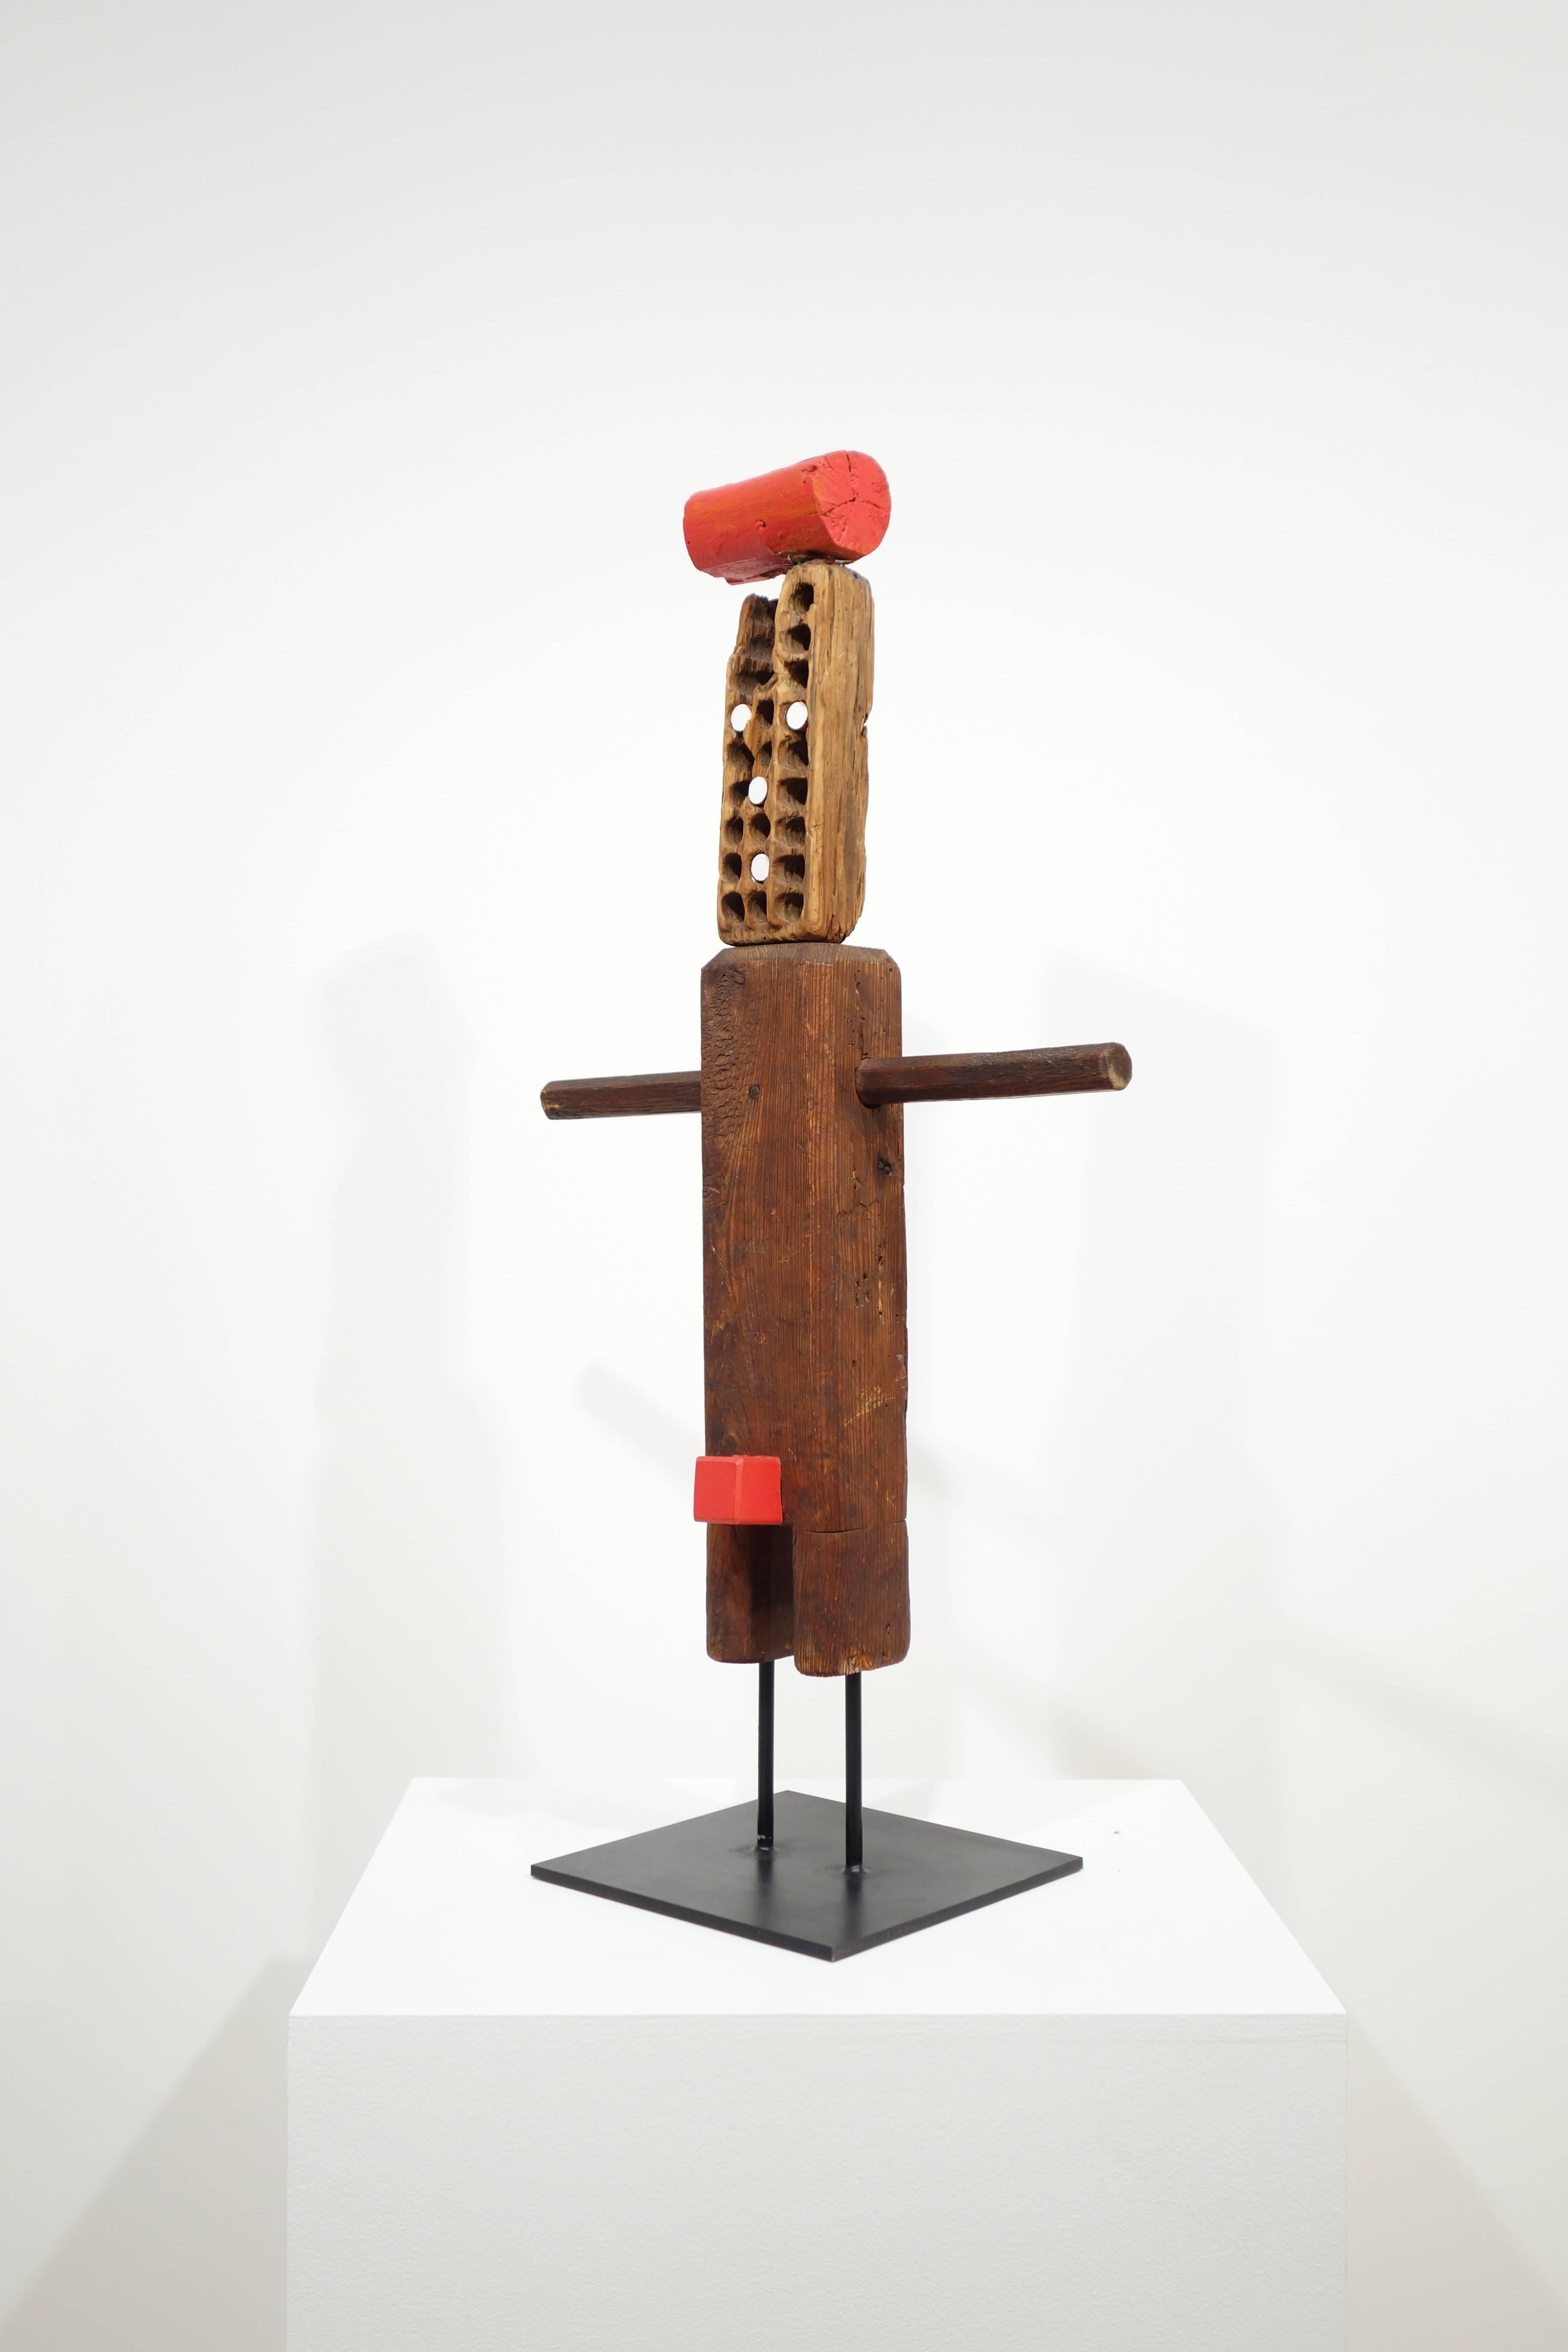 Ivan Chermayeff Figurative Sculpture - Young Person with Hairless Brush Head